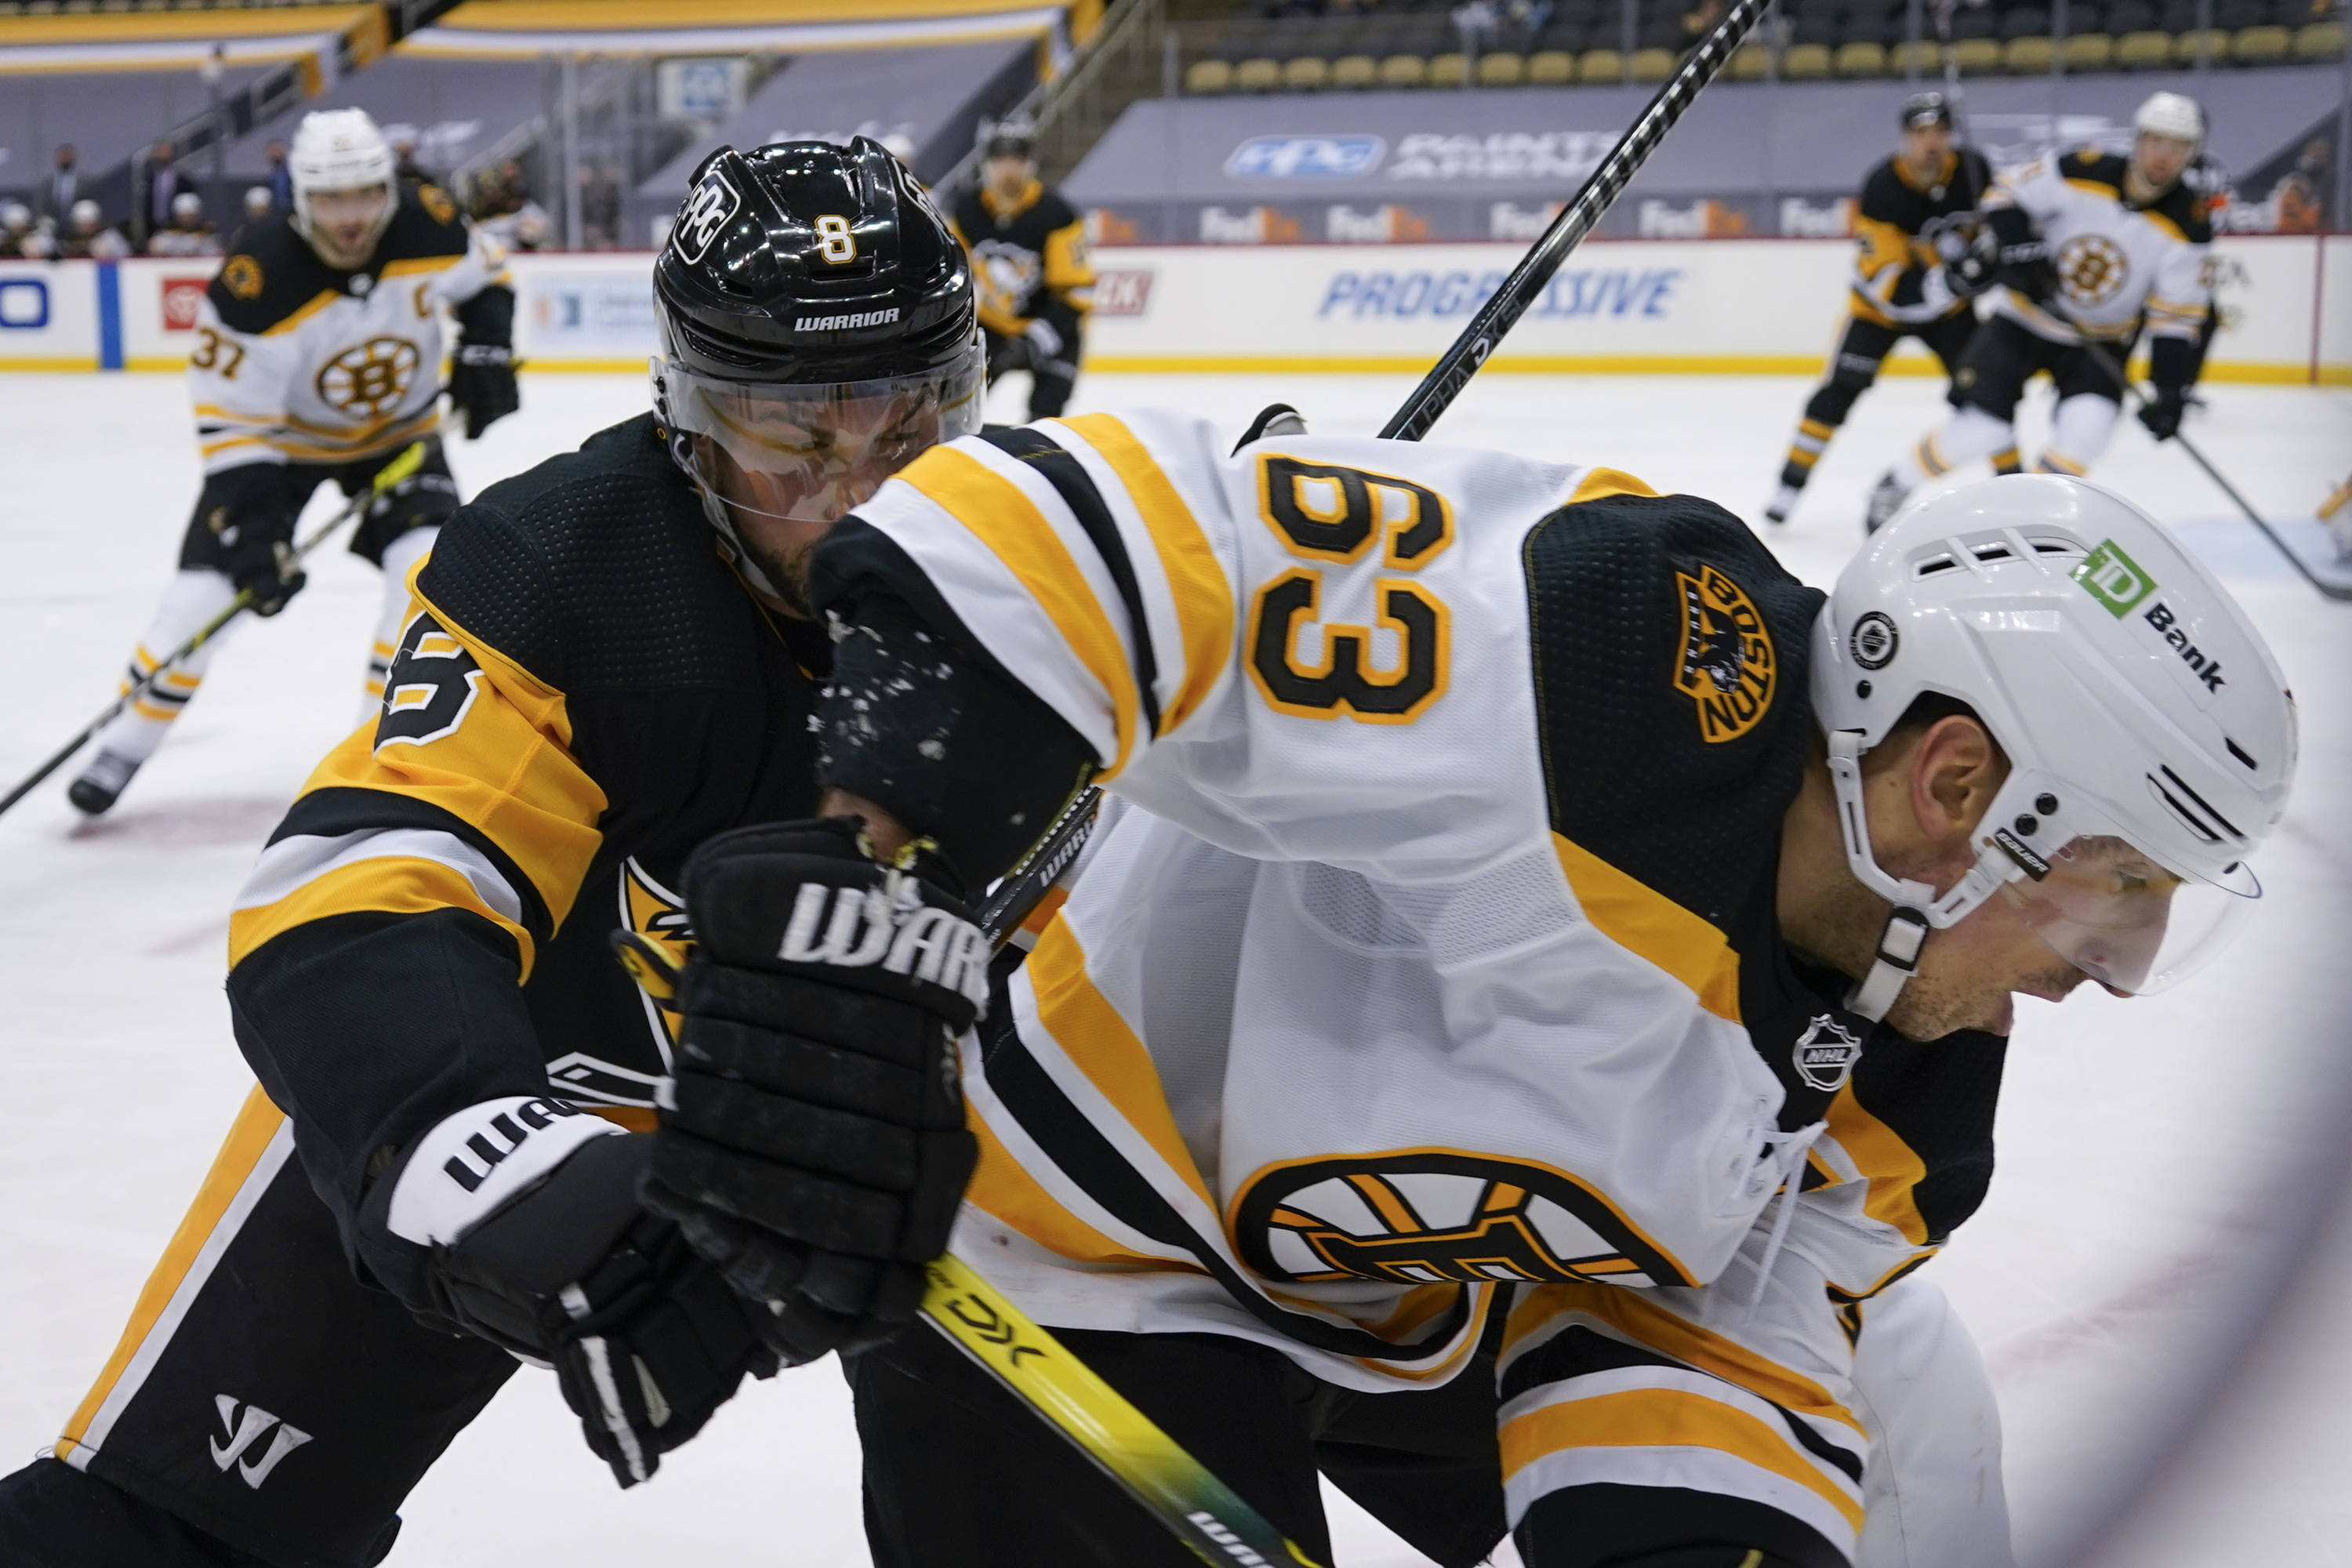 NHL How to LIVE STREAM FREE the Boston Bruins at the Pittsburgh Penguins Tuesday (3-16-21)